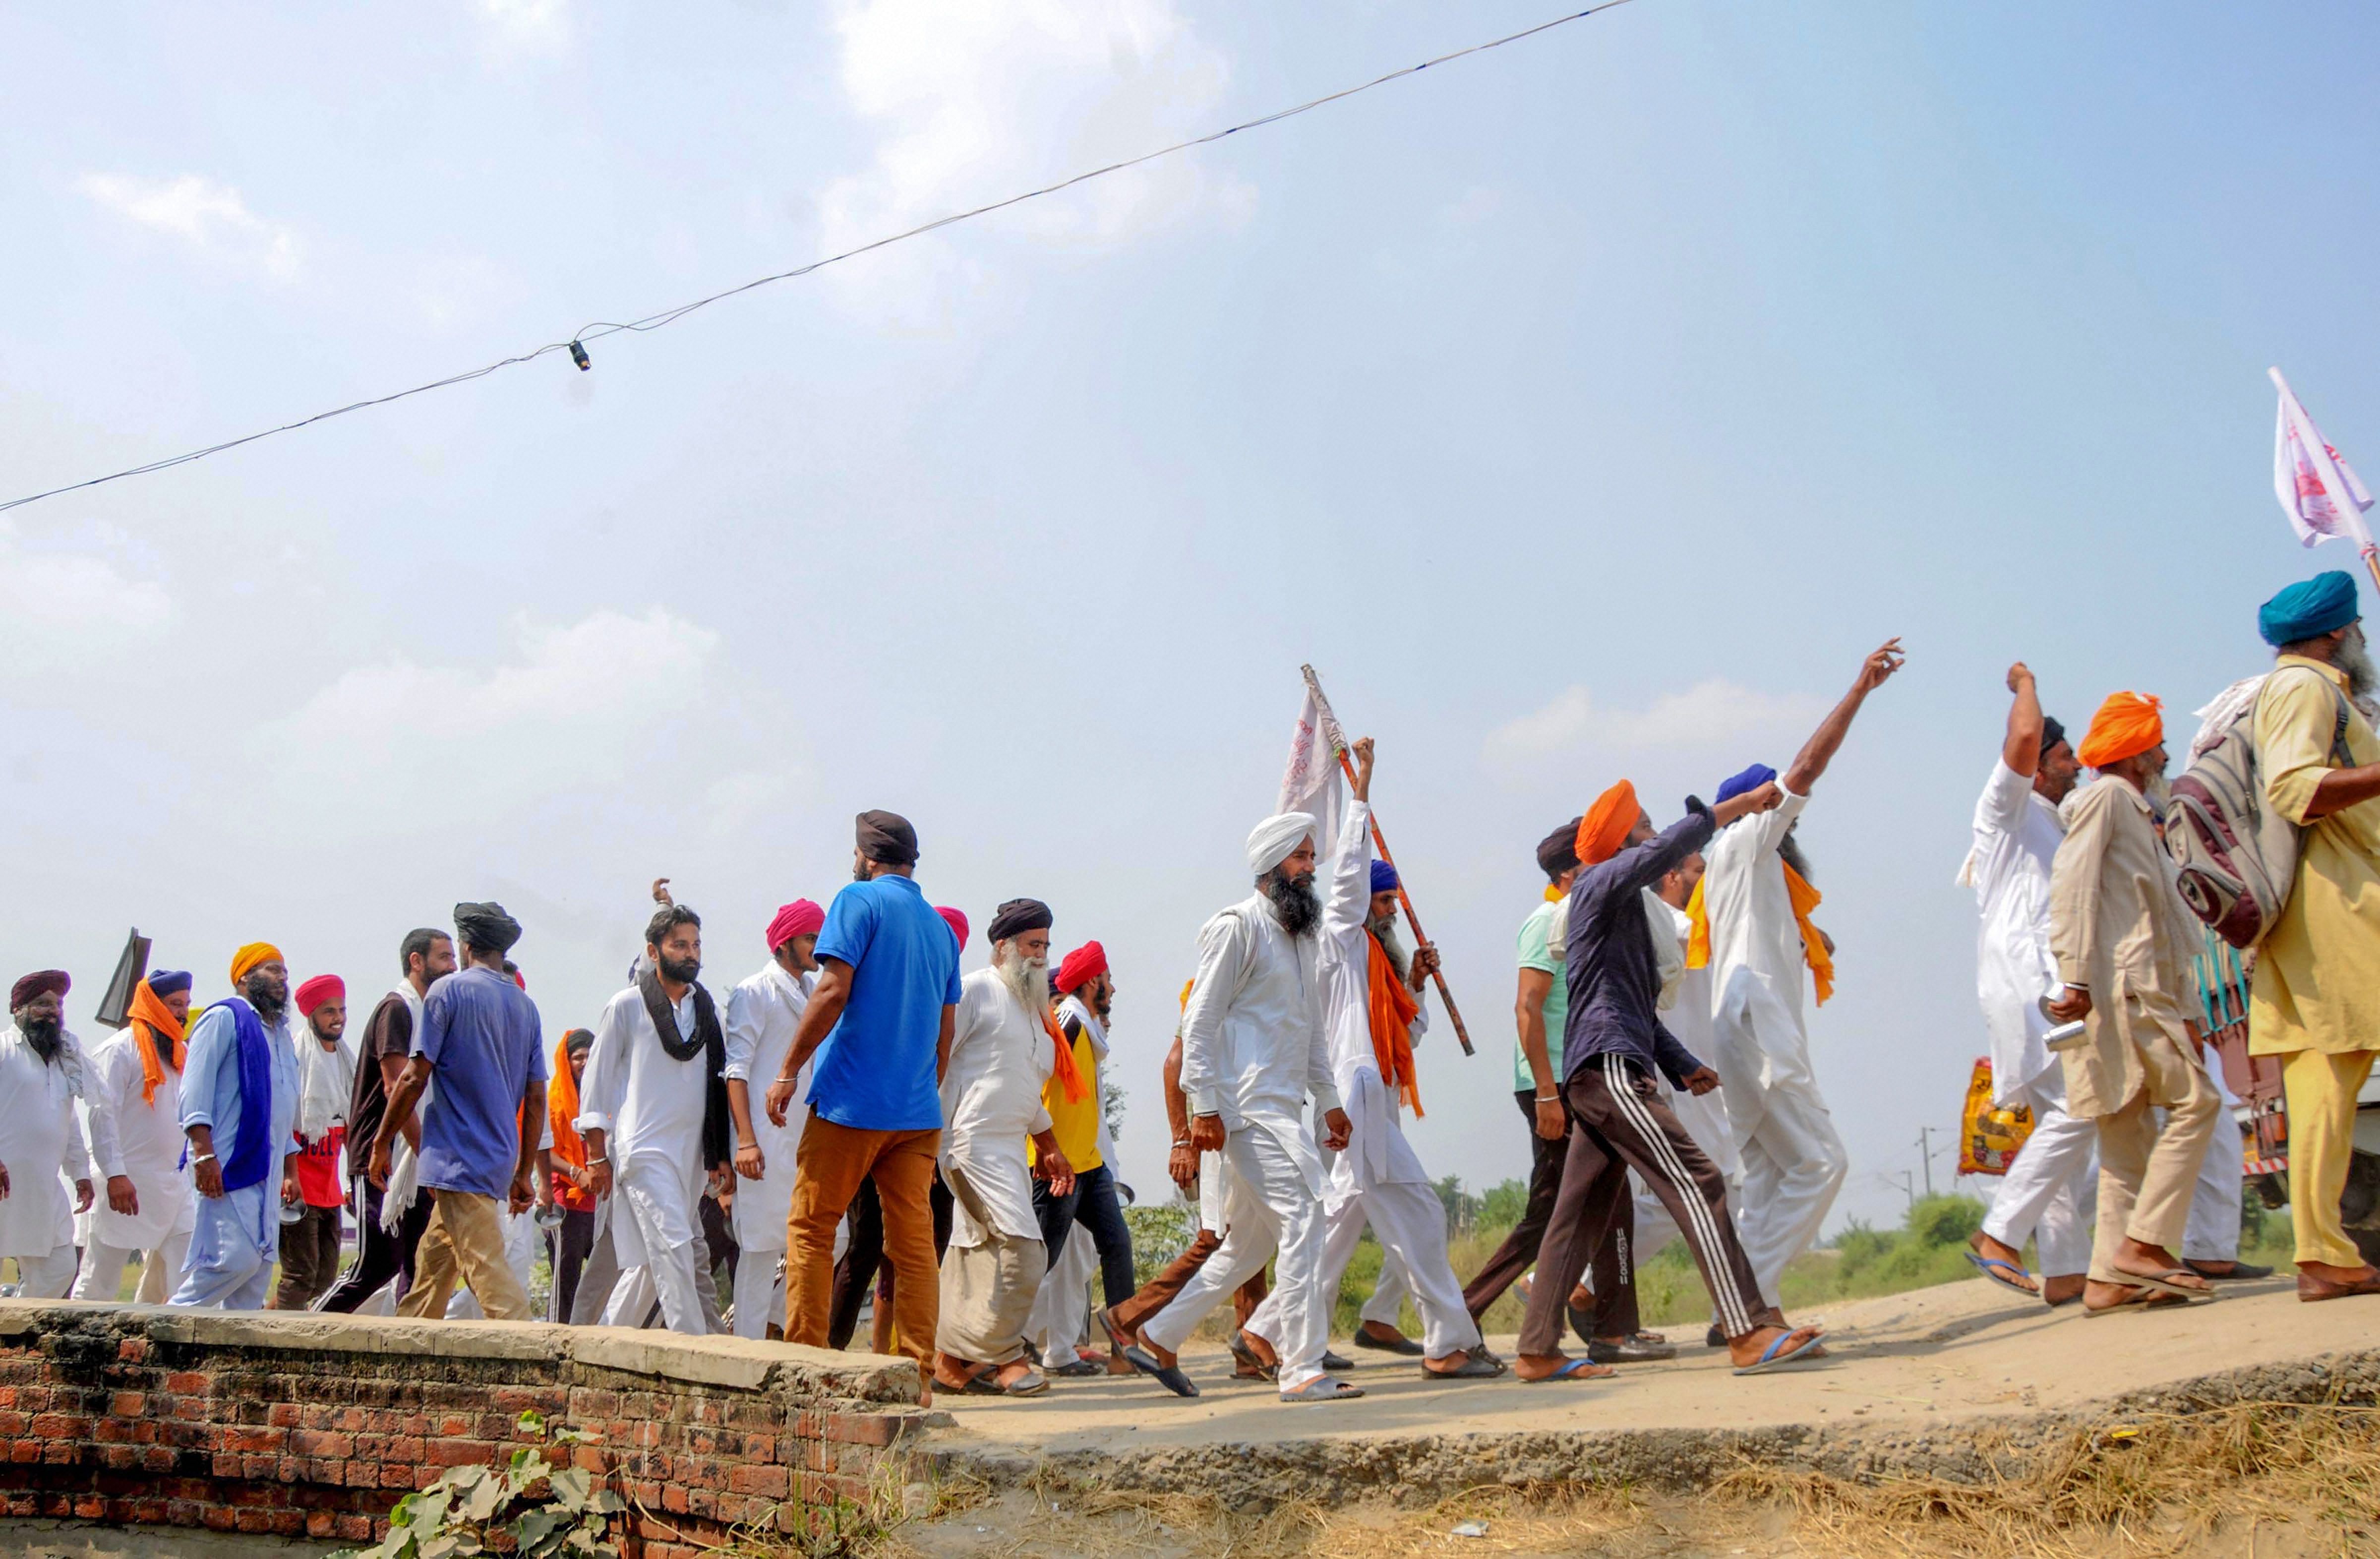 Protestors raise slogans as they arrive to join farmers in their ongoing 'Rail Roko' or 'Stop the Trains' agitation against farm laws. Credits: PTI Photo